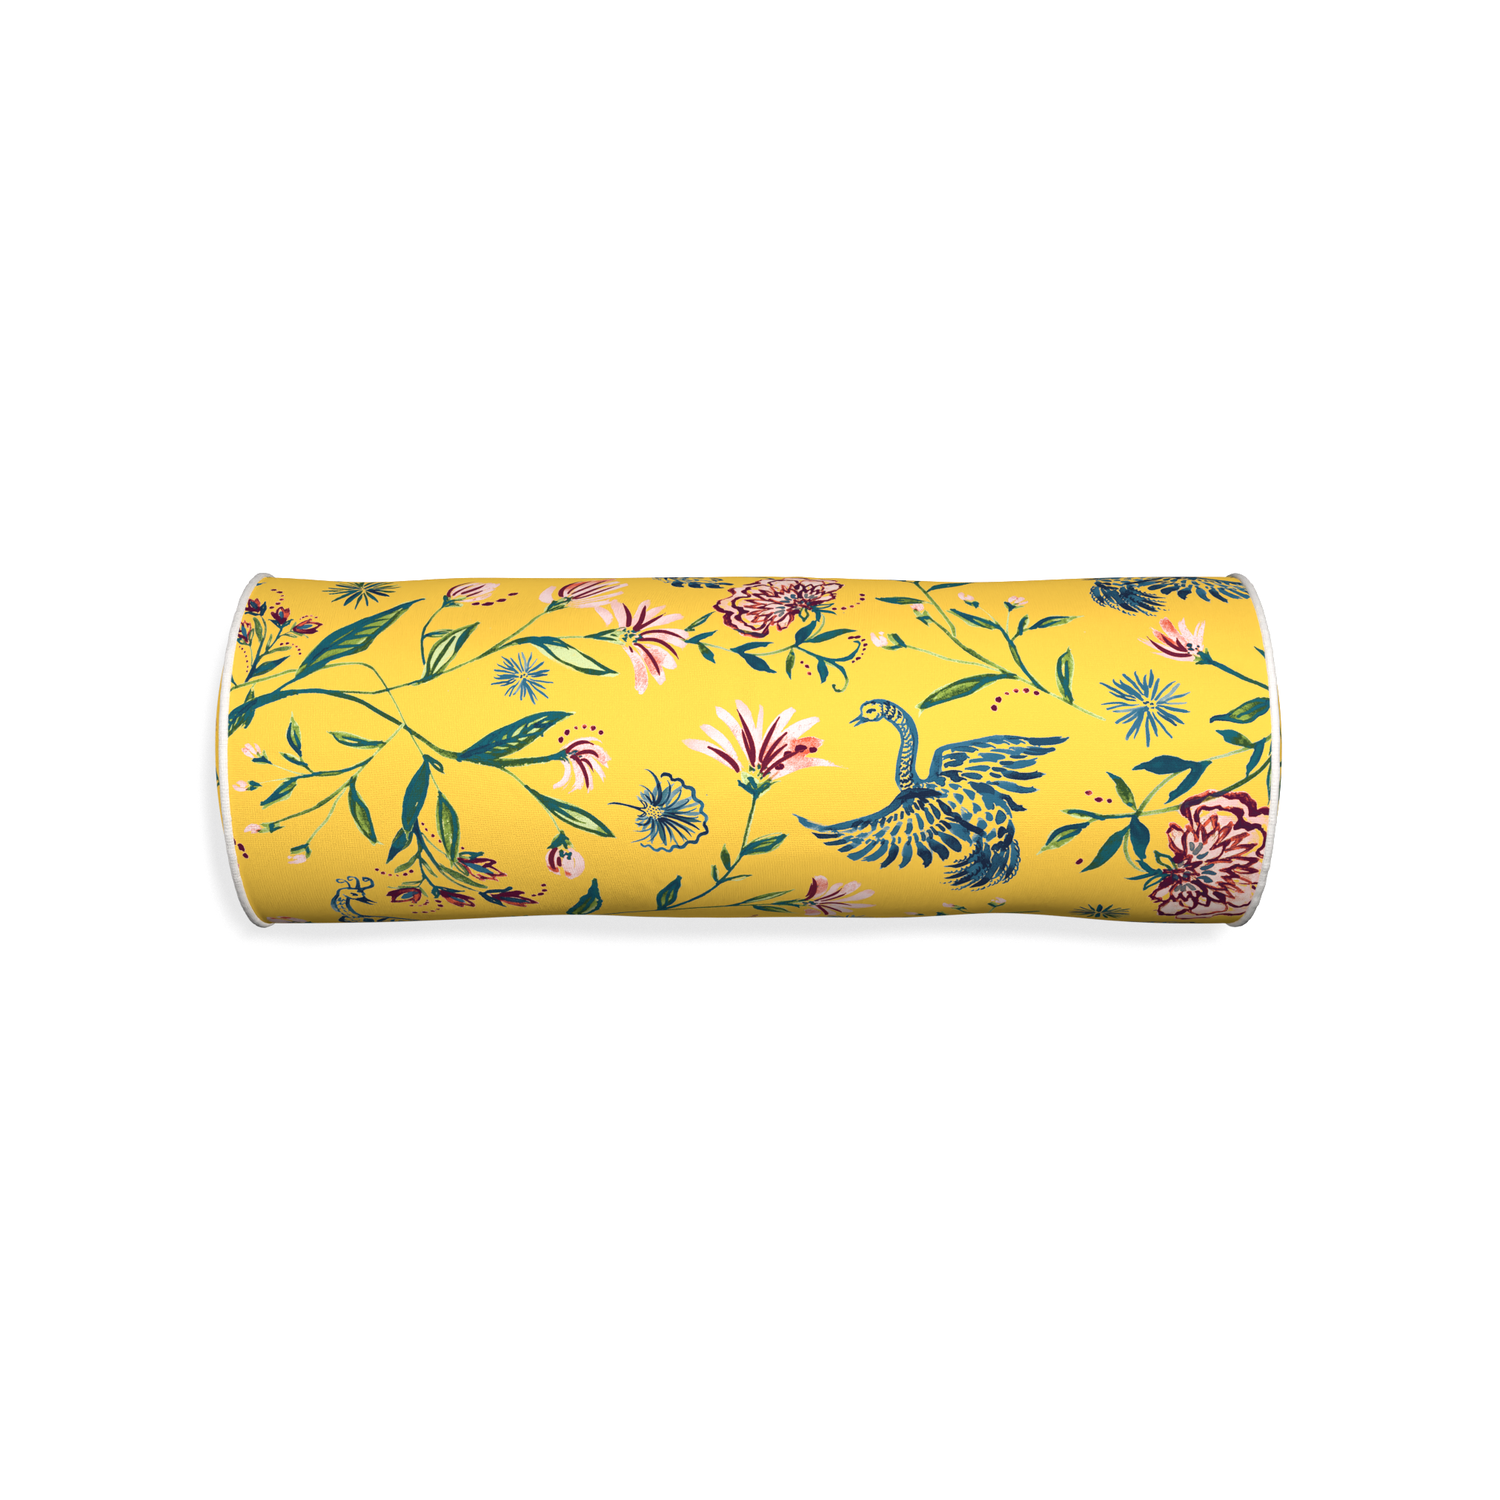 Bolster daphne canary custom yellow chinoiseriepillow with snow piping on white background